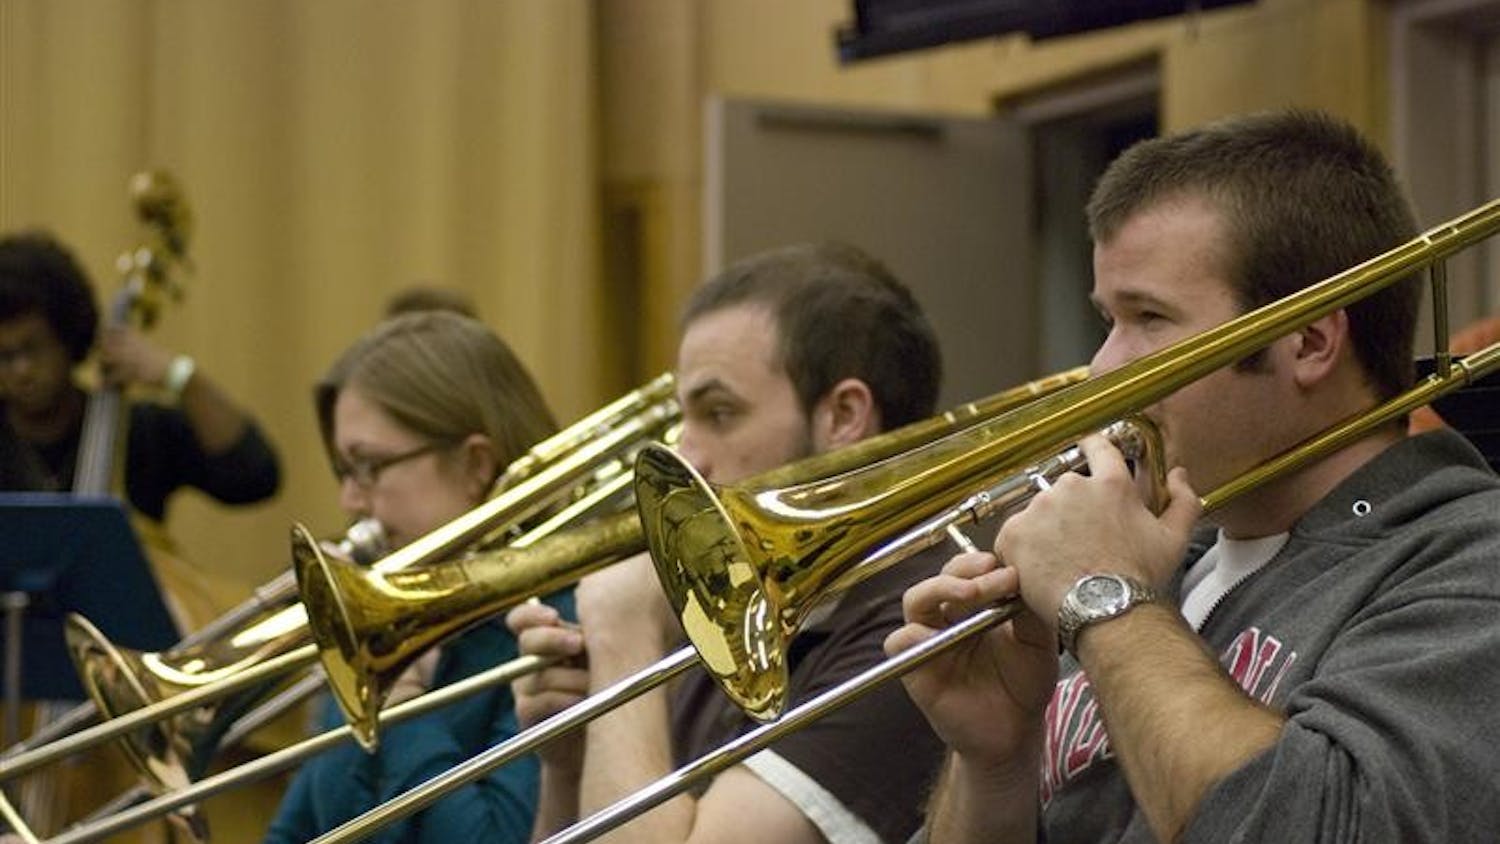 Trombonists Heather Gibson, Simon Wood and Russell Ballenger practice for Big Band Extravaganza on April 15 in the Jacobs School of Music. Brent Wallarab, leader of this group, and David Baker will showcase their bands at 8 p.m. at the Musical Arts Center.